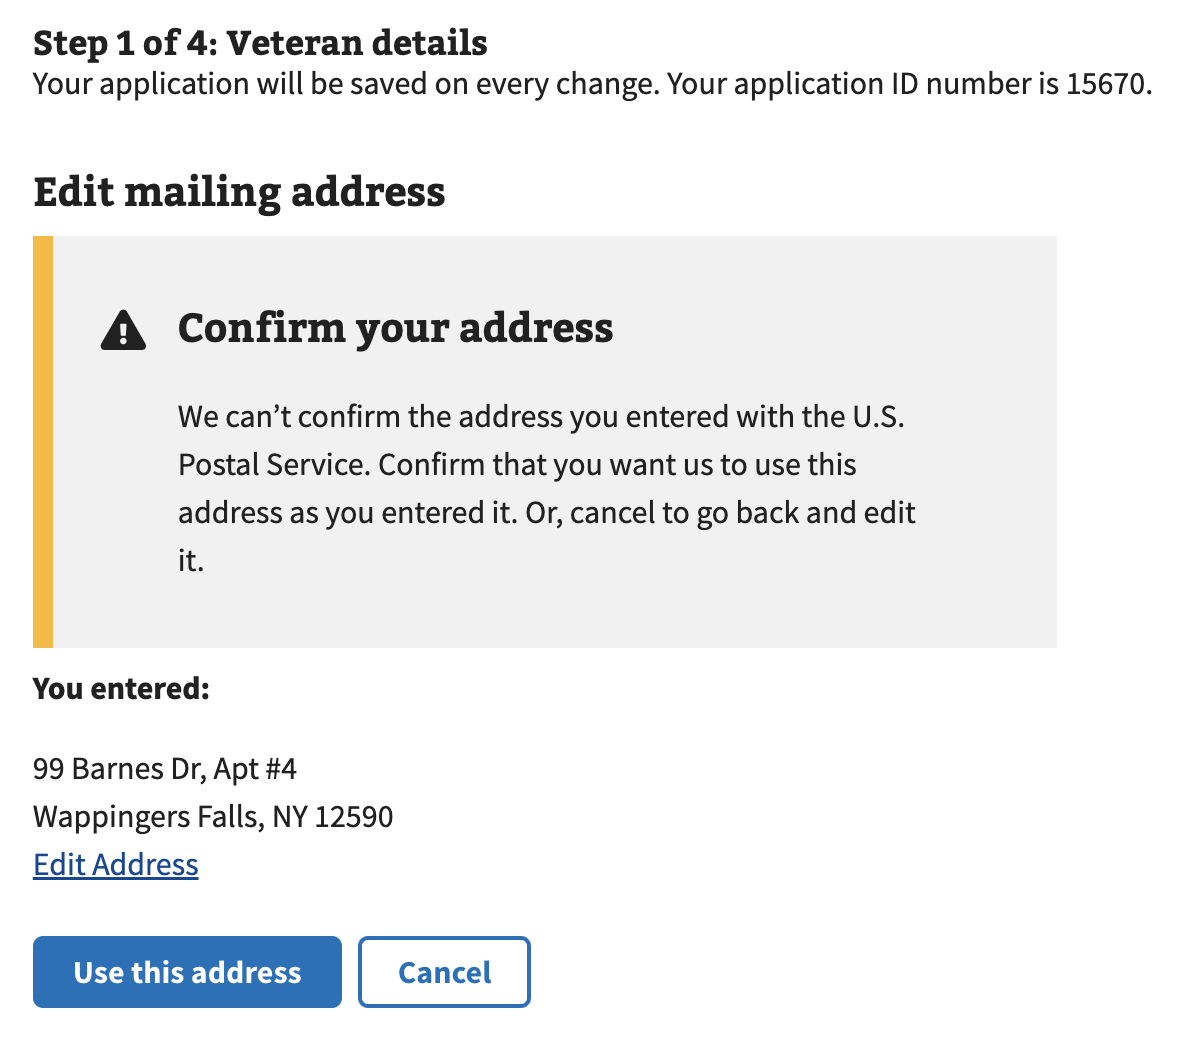 An Alert in a form flow that warns the user that the address they entered could not be found in U.S. Postal Service data.